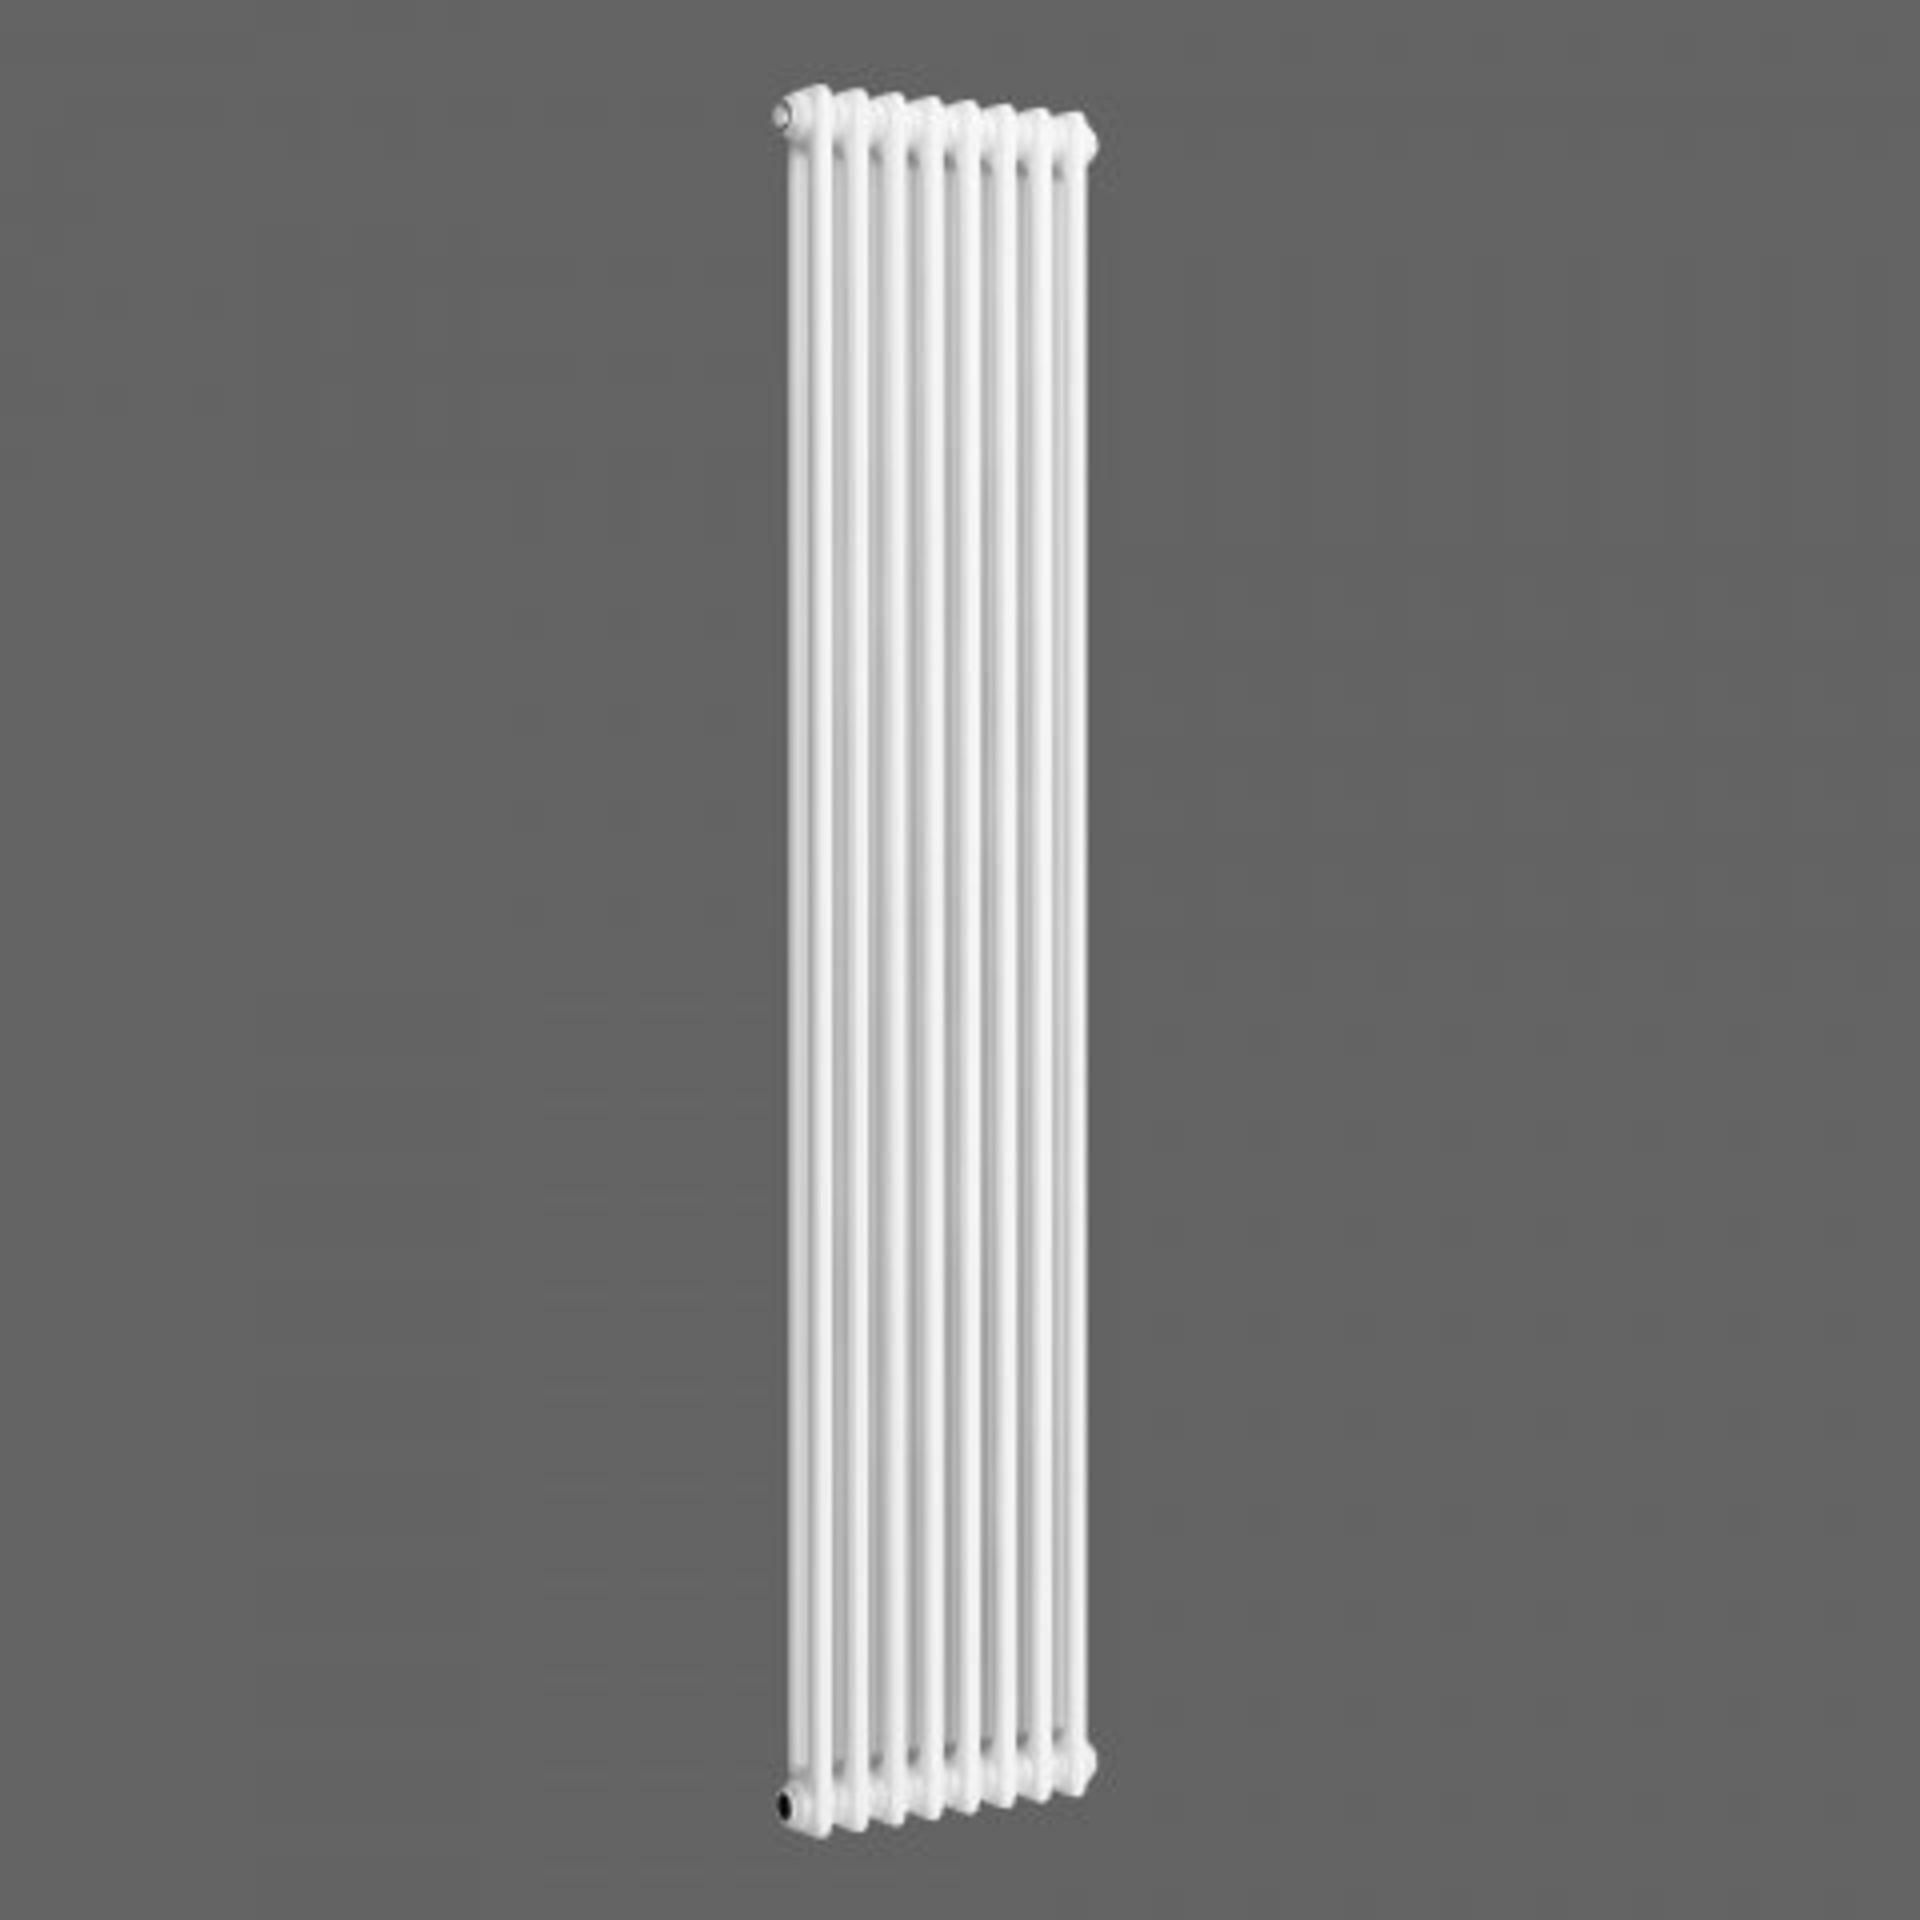 (O40) 1800x380mm White Double Panel Vertical Colosseum Traditional Radiator. RRP £355.99. For an - Image 3 of 5